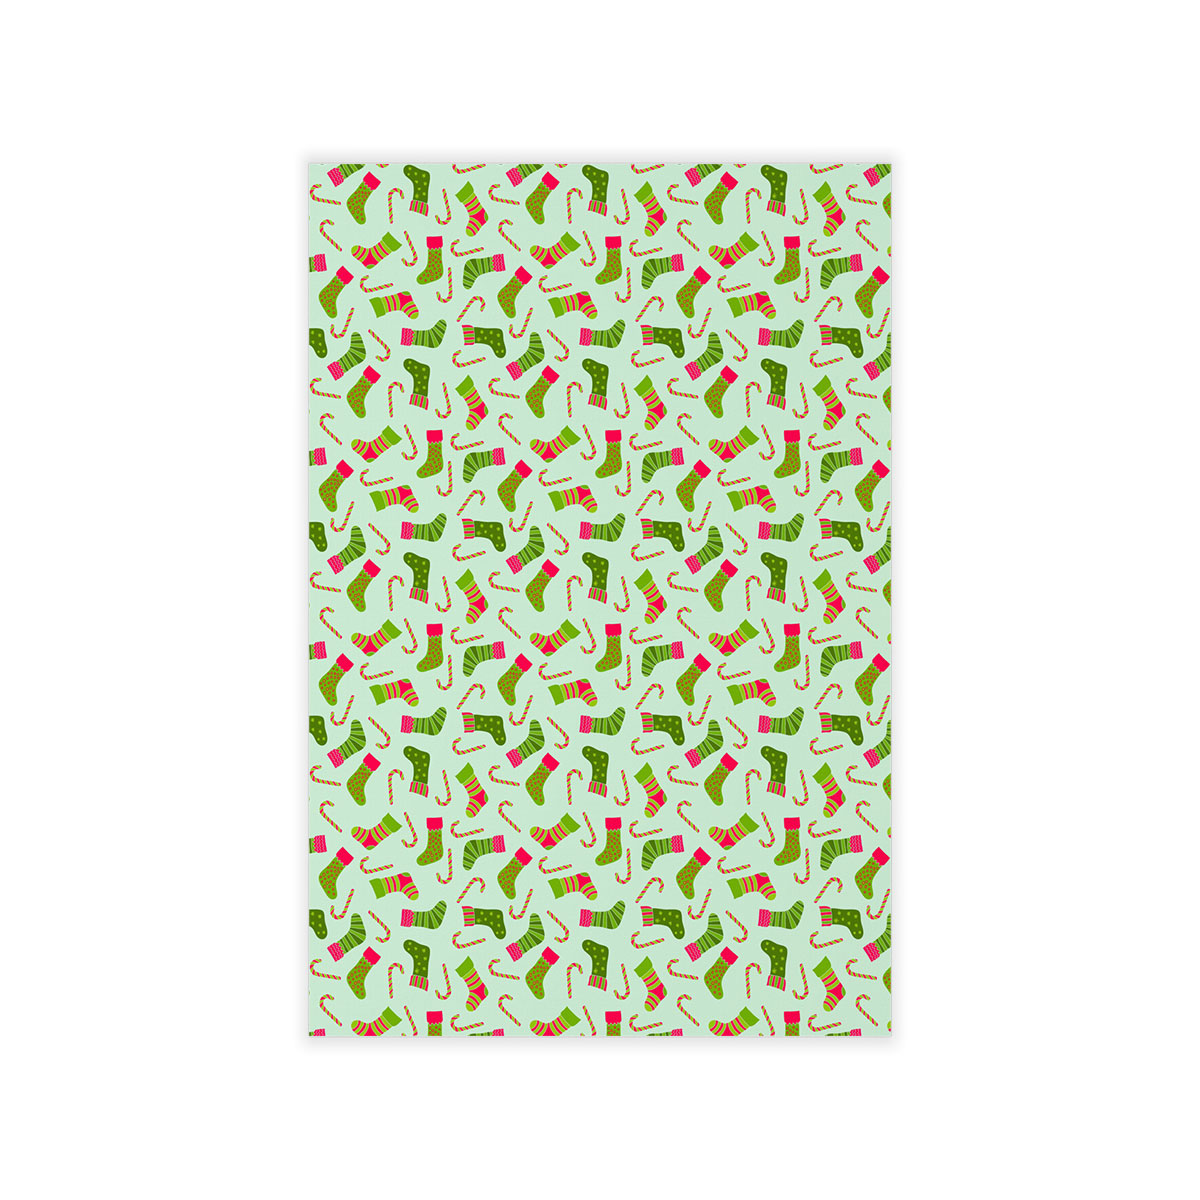 Christmas Socks, Colorful Socks And Candy Canes Wall Decals